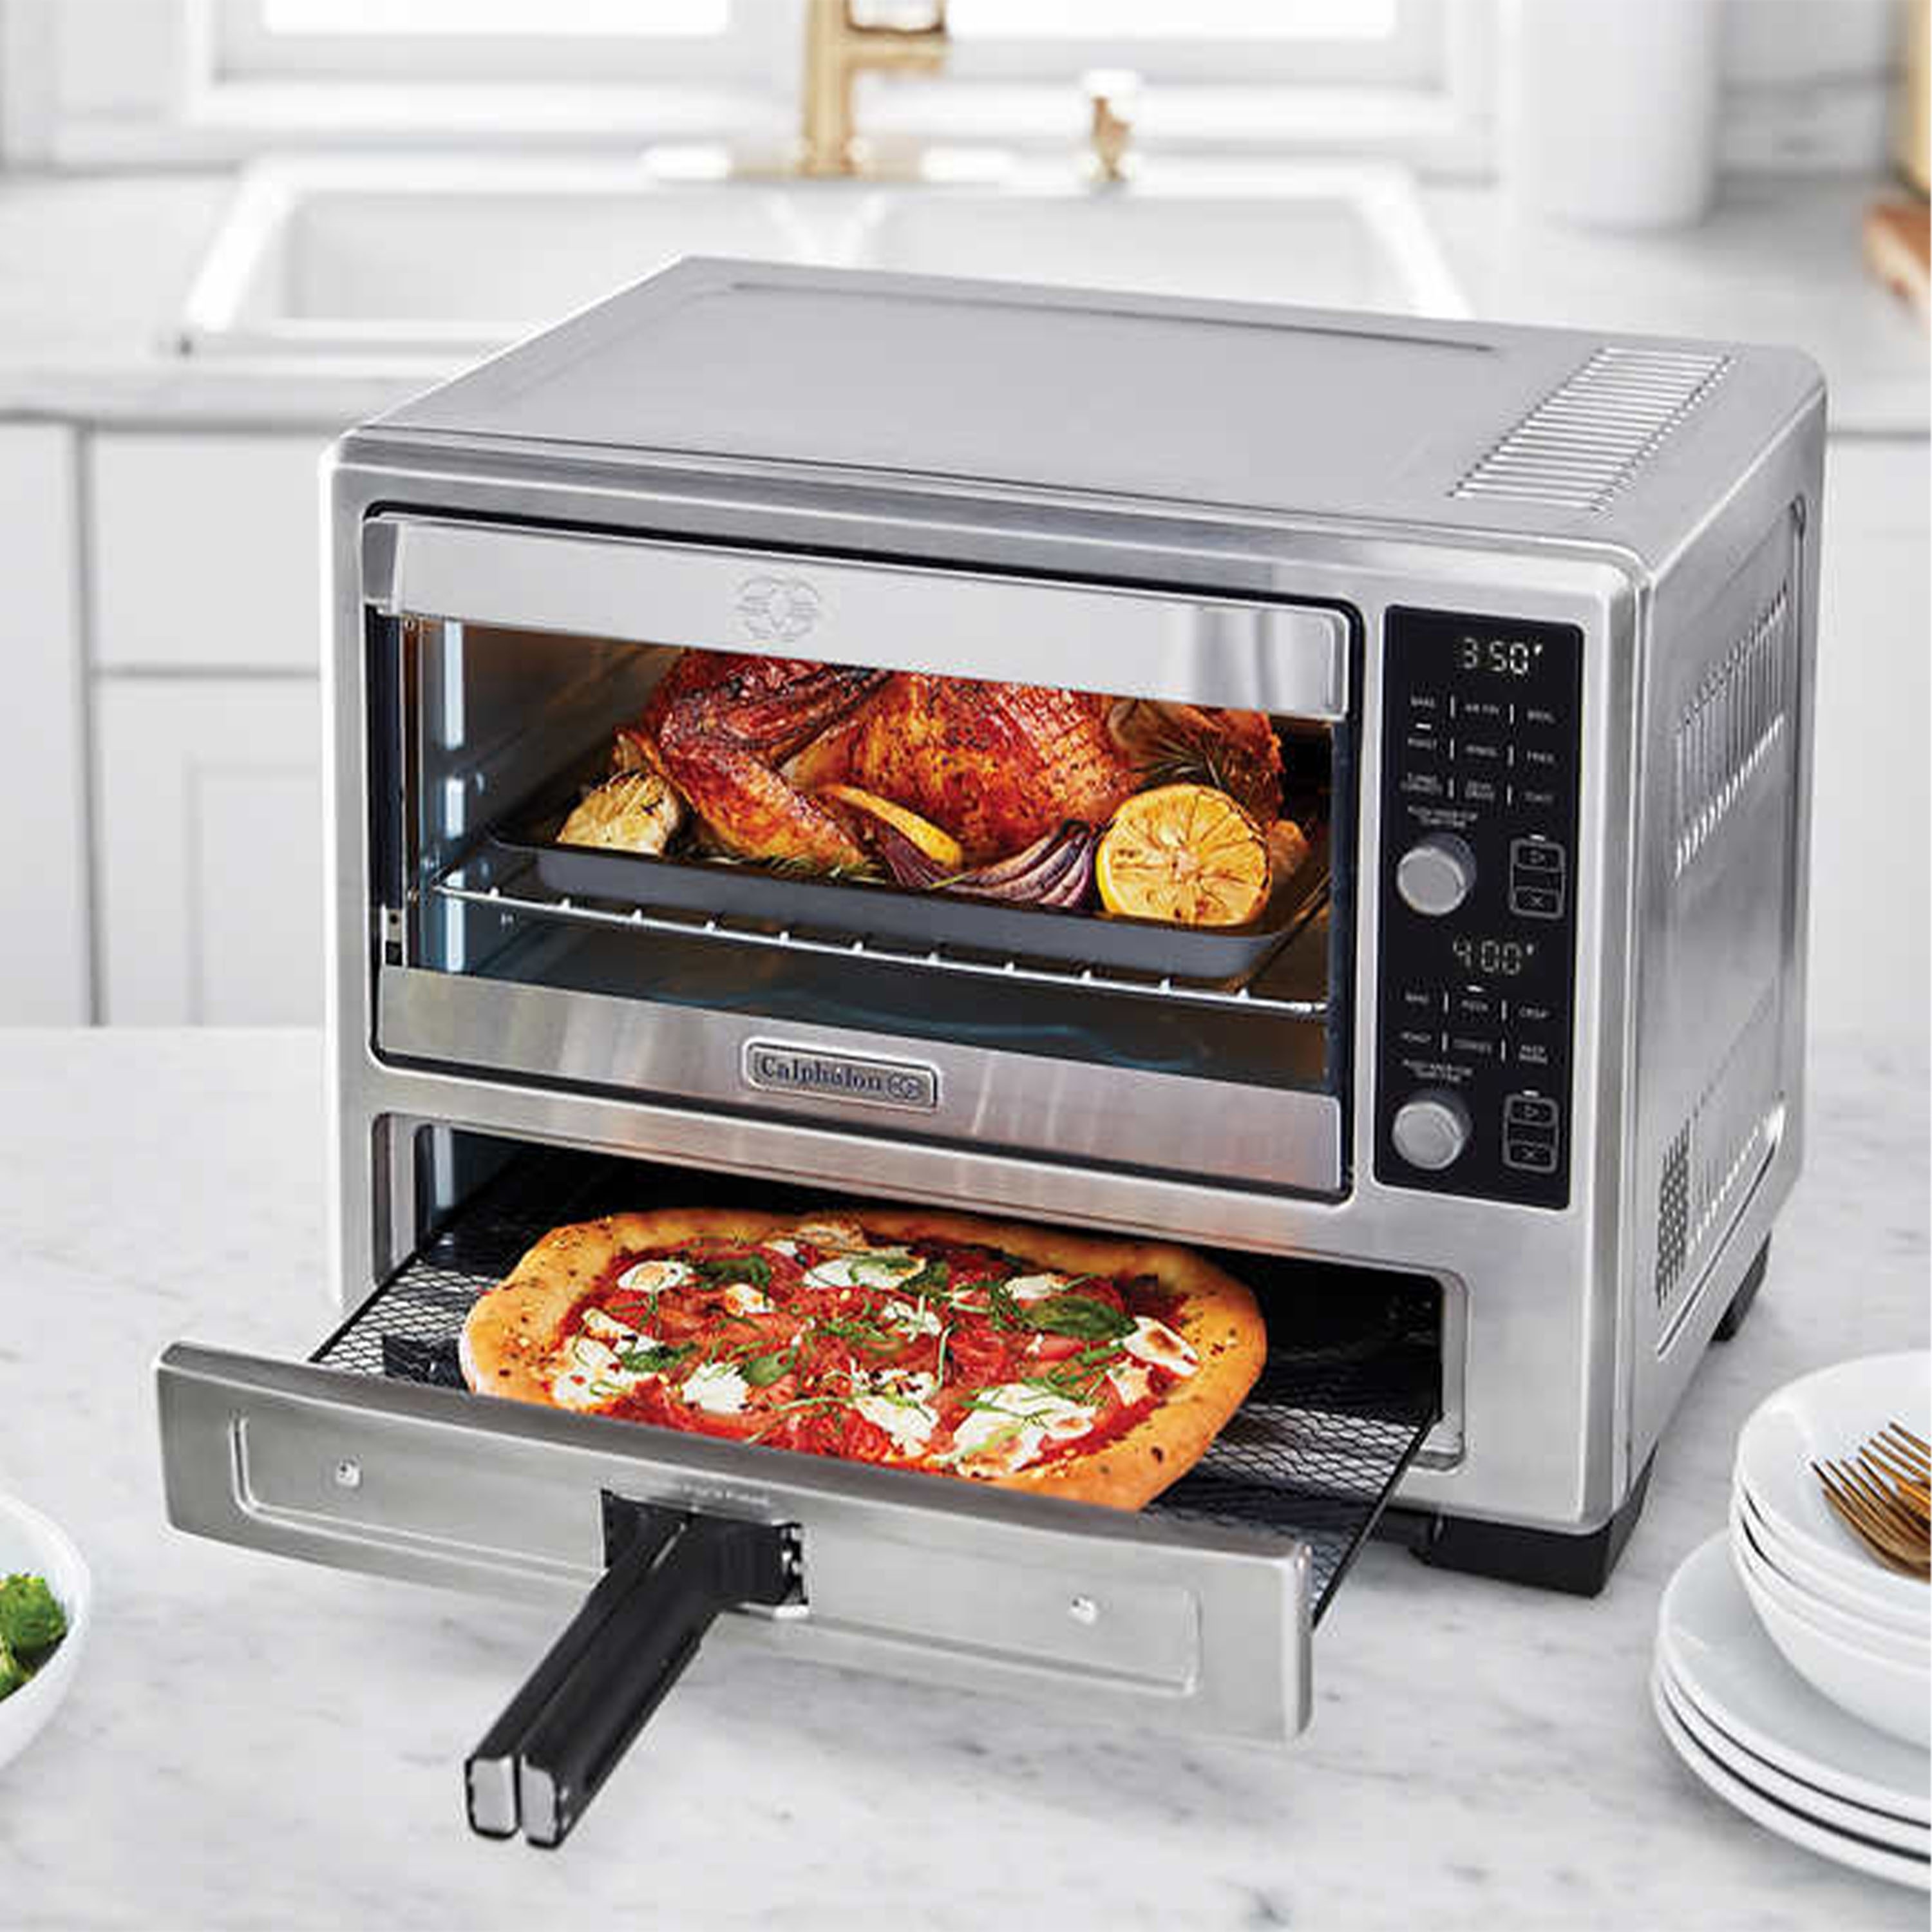 Calphalon Performance Air Fry 1400W Countertop Oven - Stainless Steel  (2339289) for sale online